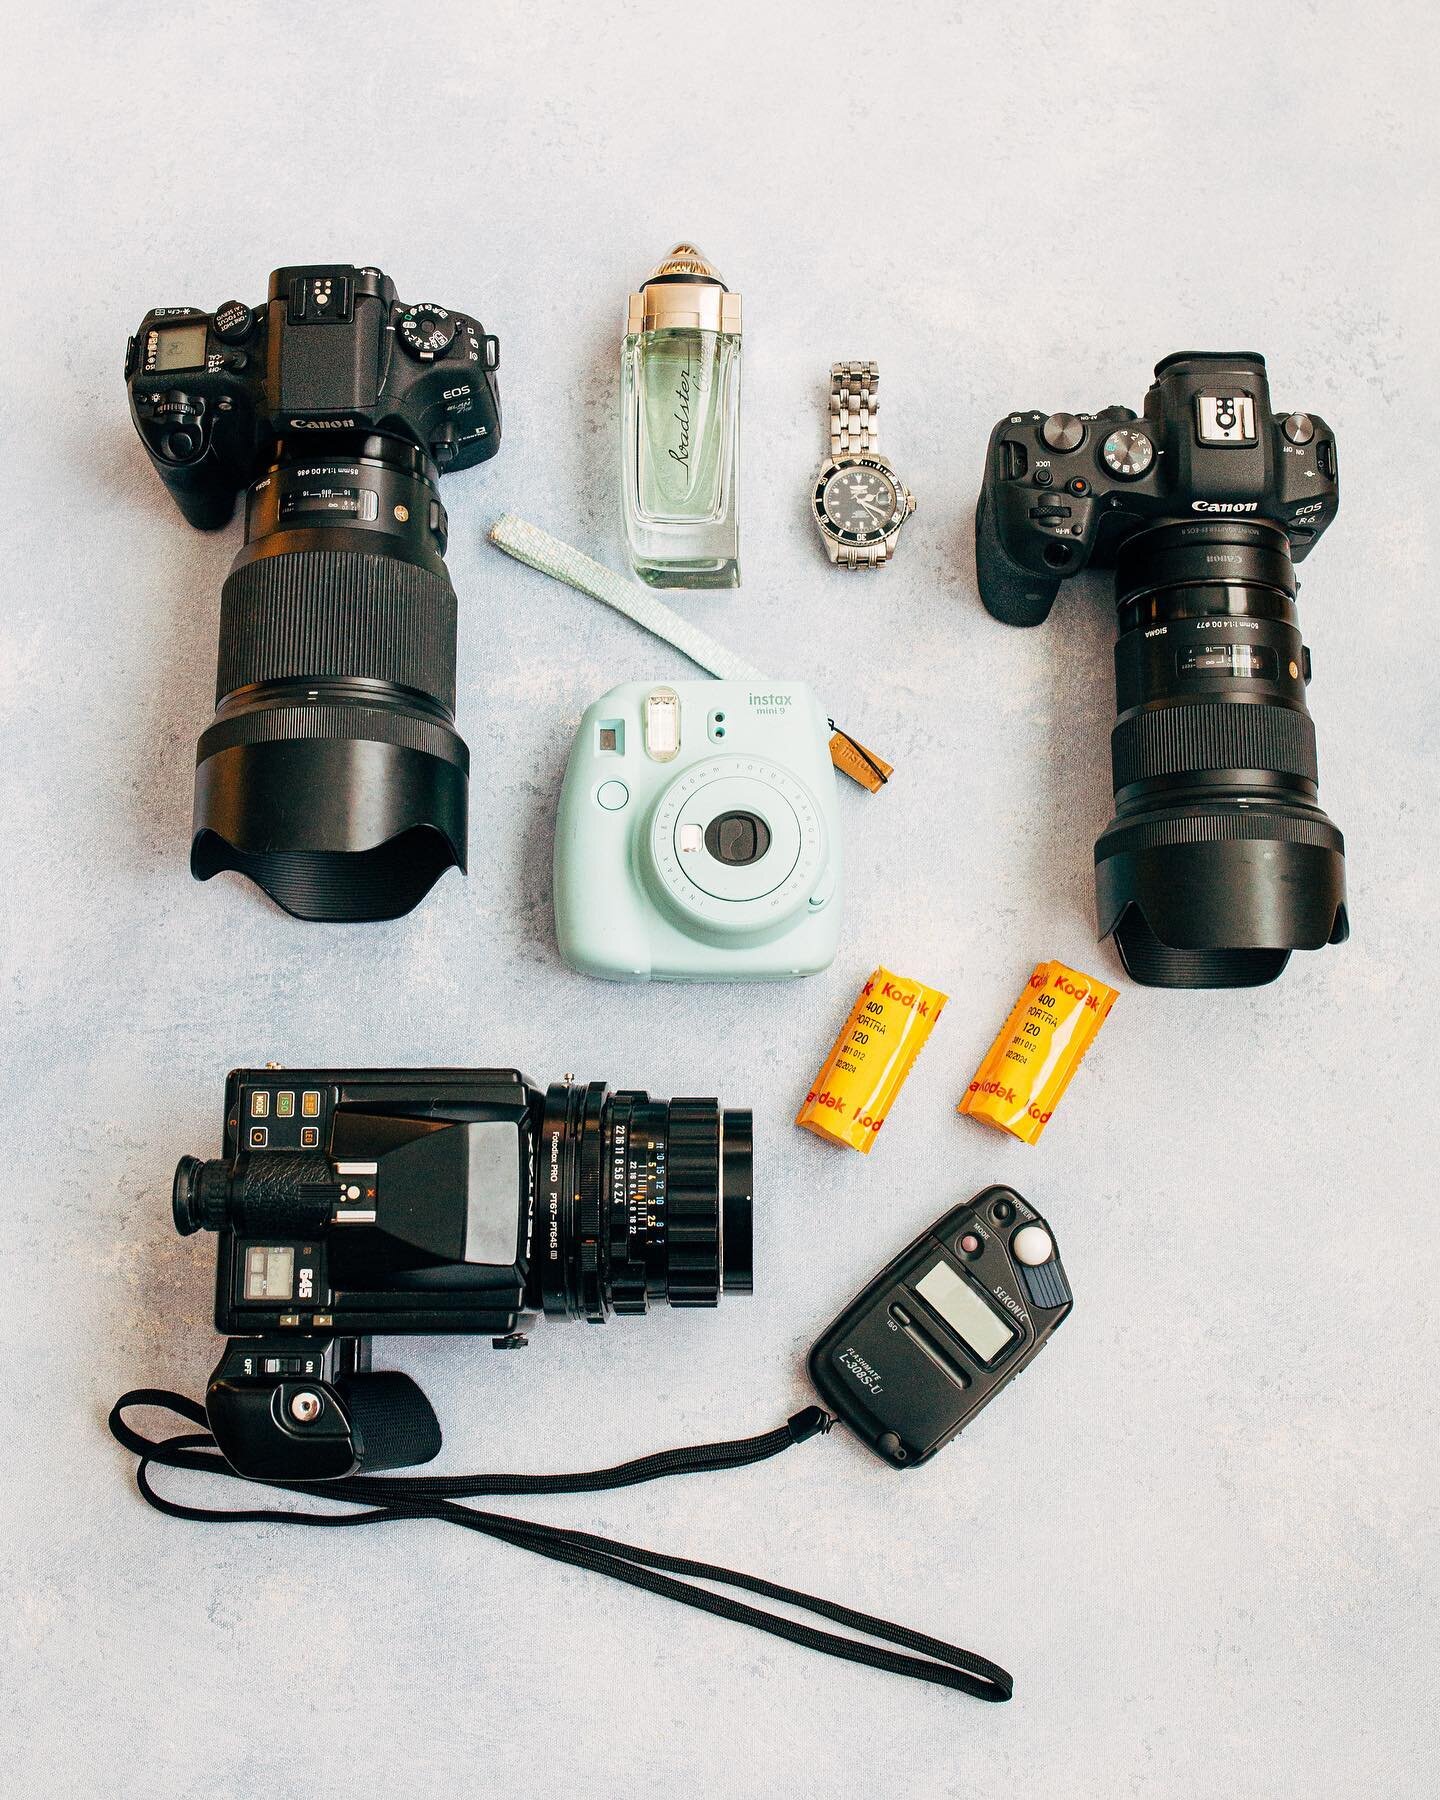 Let&rsquo;s start 2024 wedding season 🤩 
What is in your bag they ask! Here you go!
Canon R6 - to make sure everything perfect 👌 
Canon Elan 7ne- for mood 🎞️ 
Pentax 645 - for magic 💥 
Instax mini 9 - for fun 😛 
Are you excited for 2024?! 💃 let